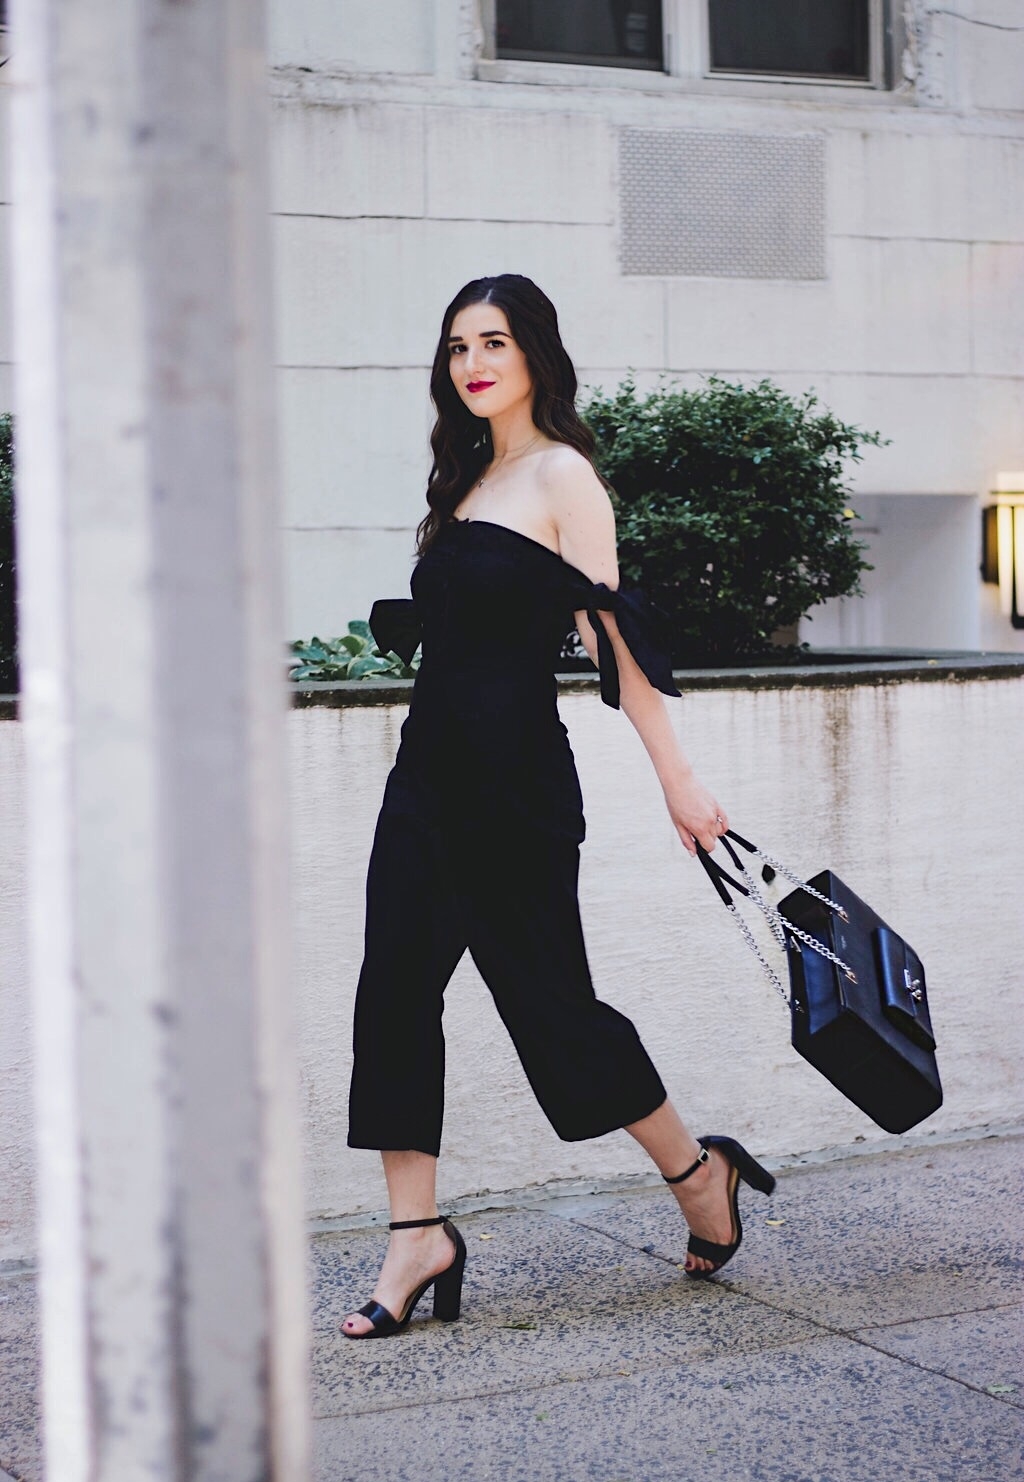 Black Asos Jumpsuit Prioritizing Life And Blog Esther Santer Fashion Blog NYC Street Style Blogger Outfit OOTD Trendy Monochrome Bag Purse Henri Bendel Beauty  Model Photoshoot Shoes Wear Heels Sandals Open Toe Hair Red Lips Pretty Summer Pants Girl.JPG